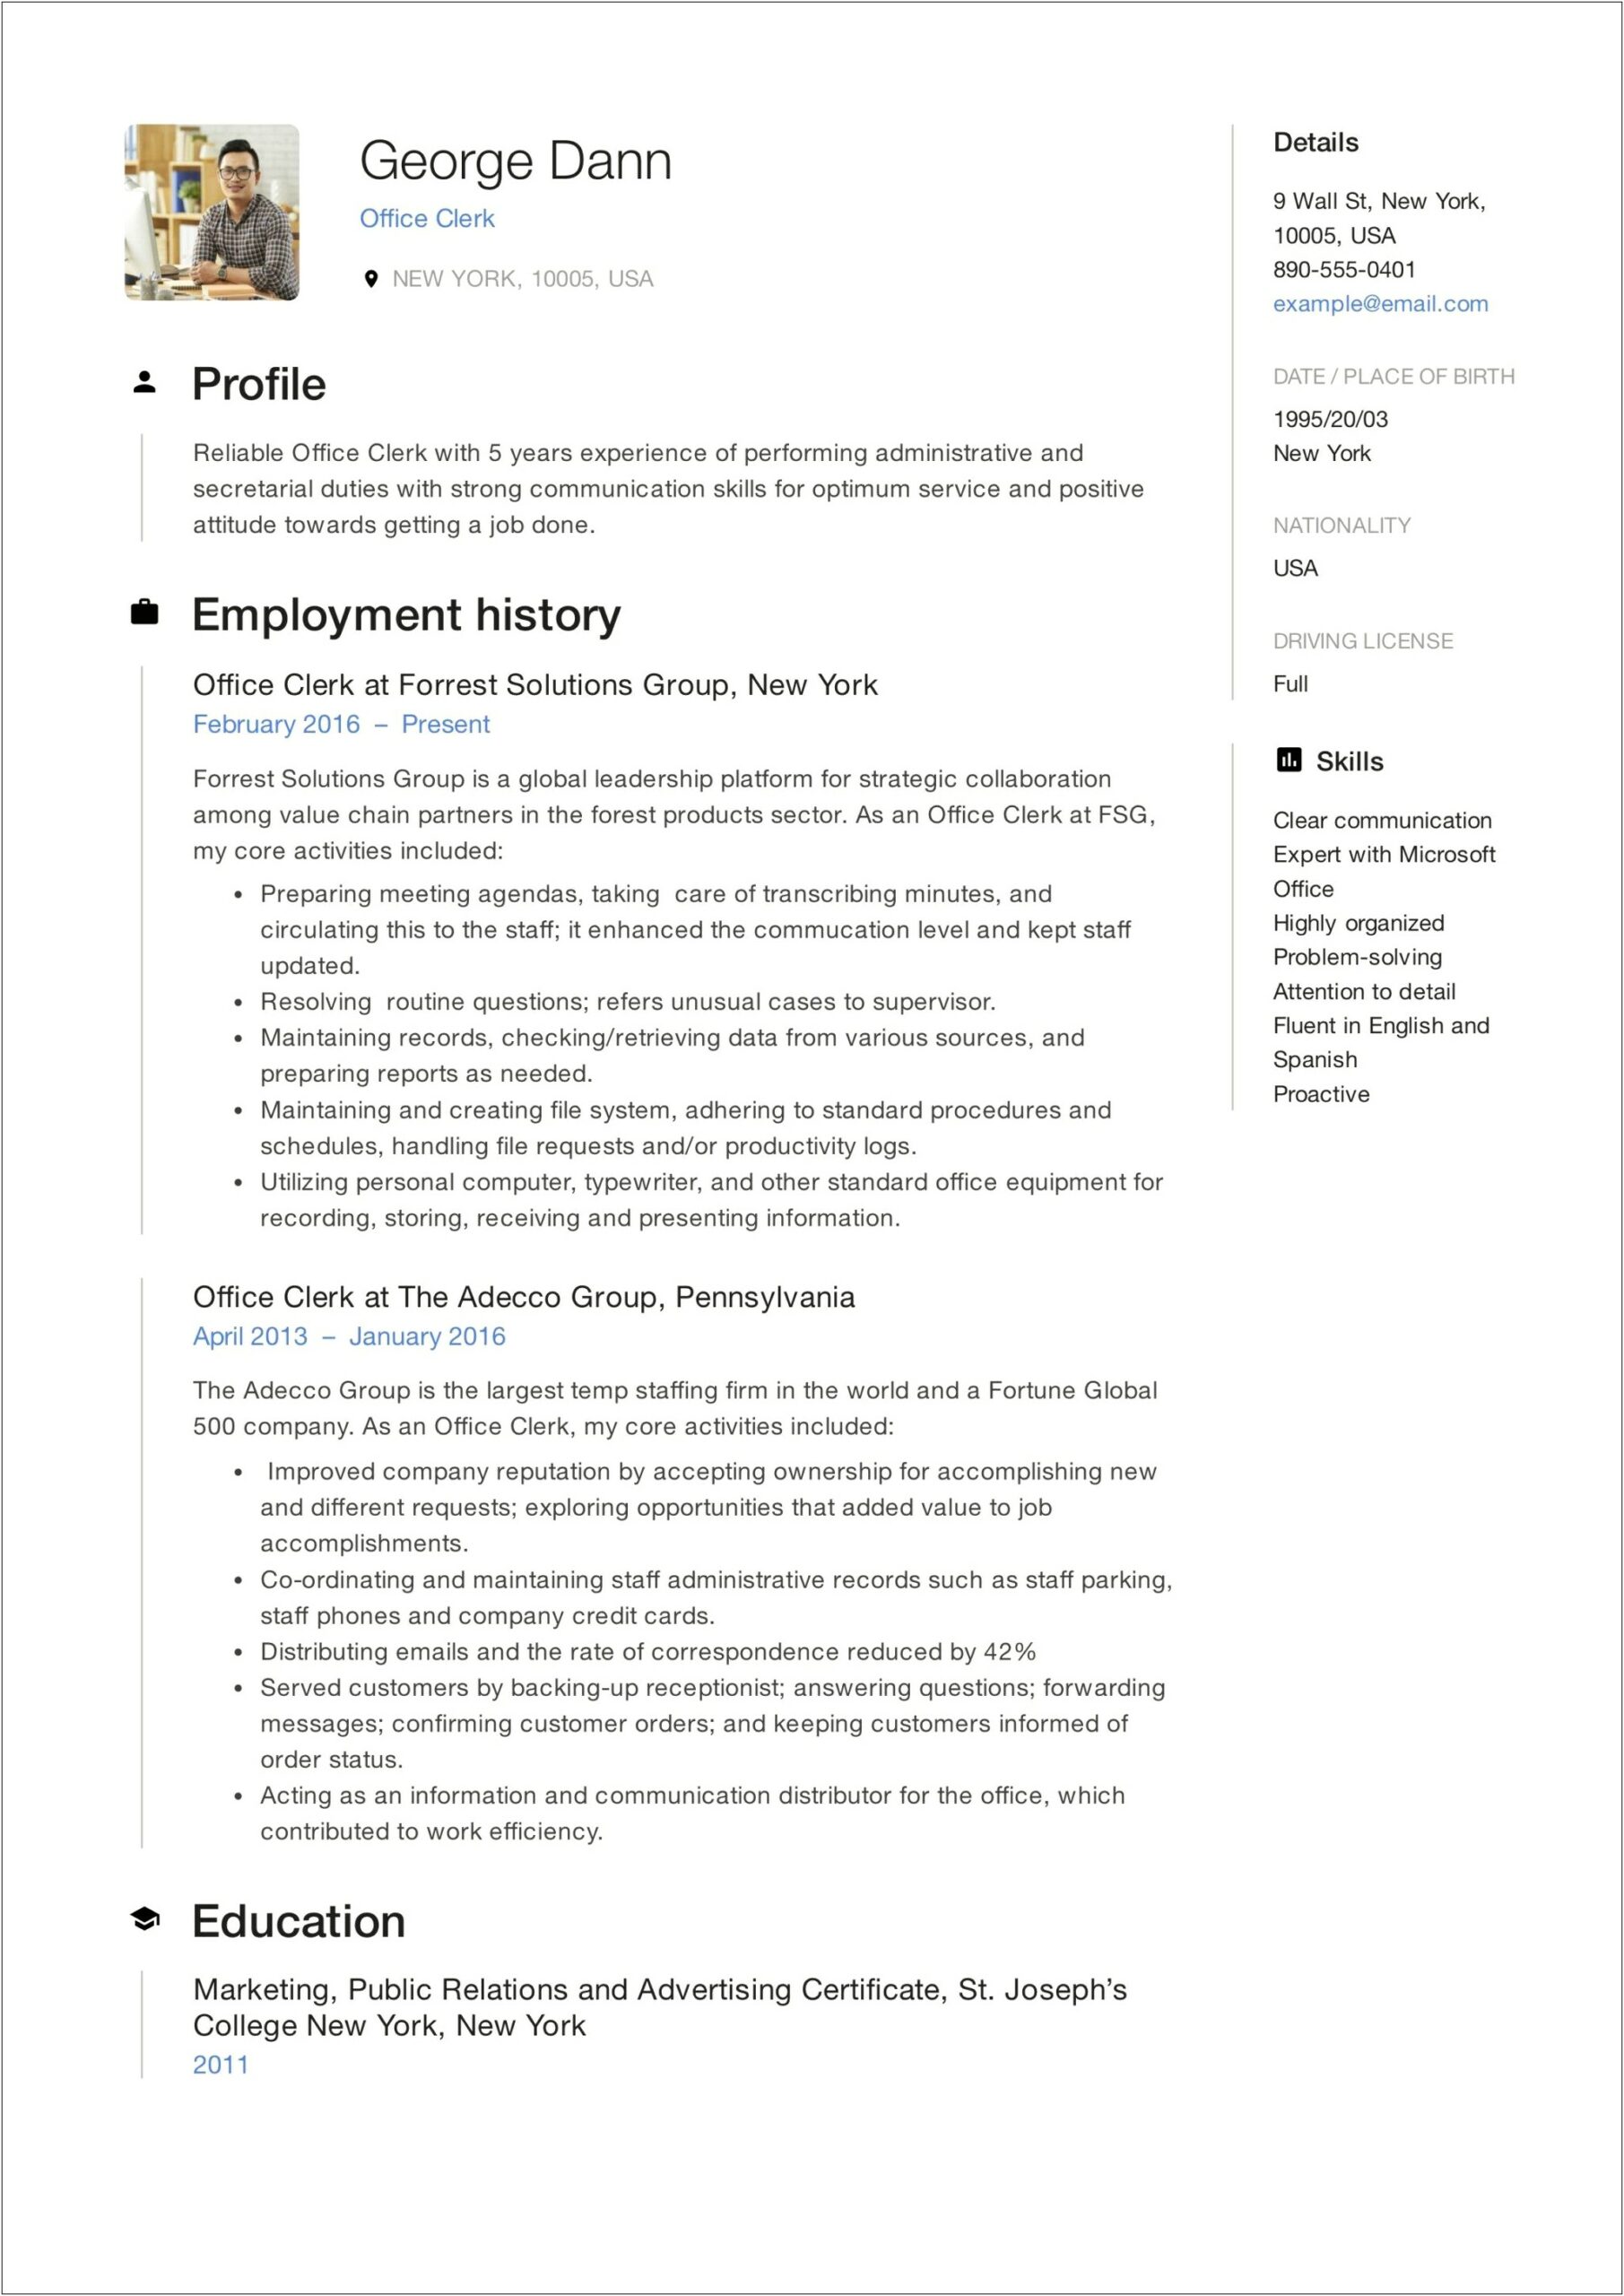 Sample Resume Objective For Office Staff